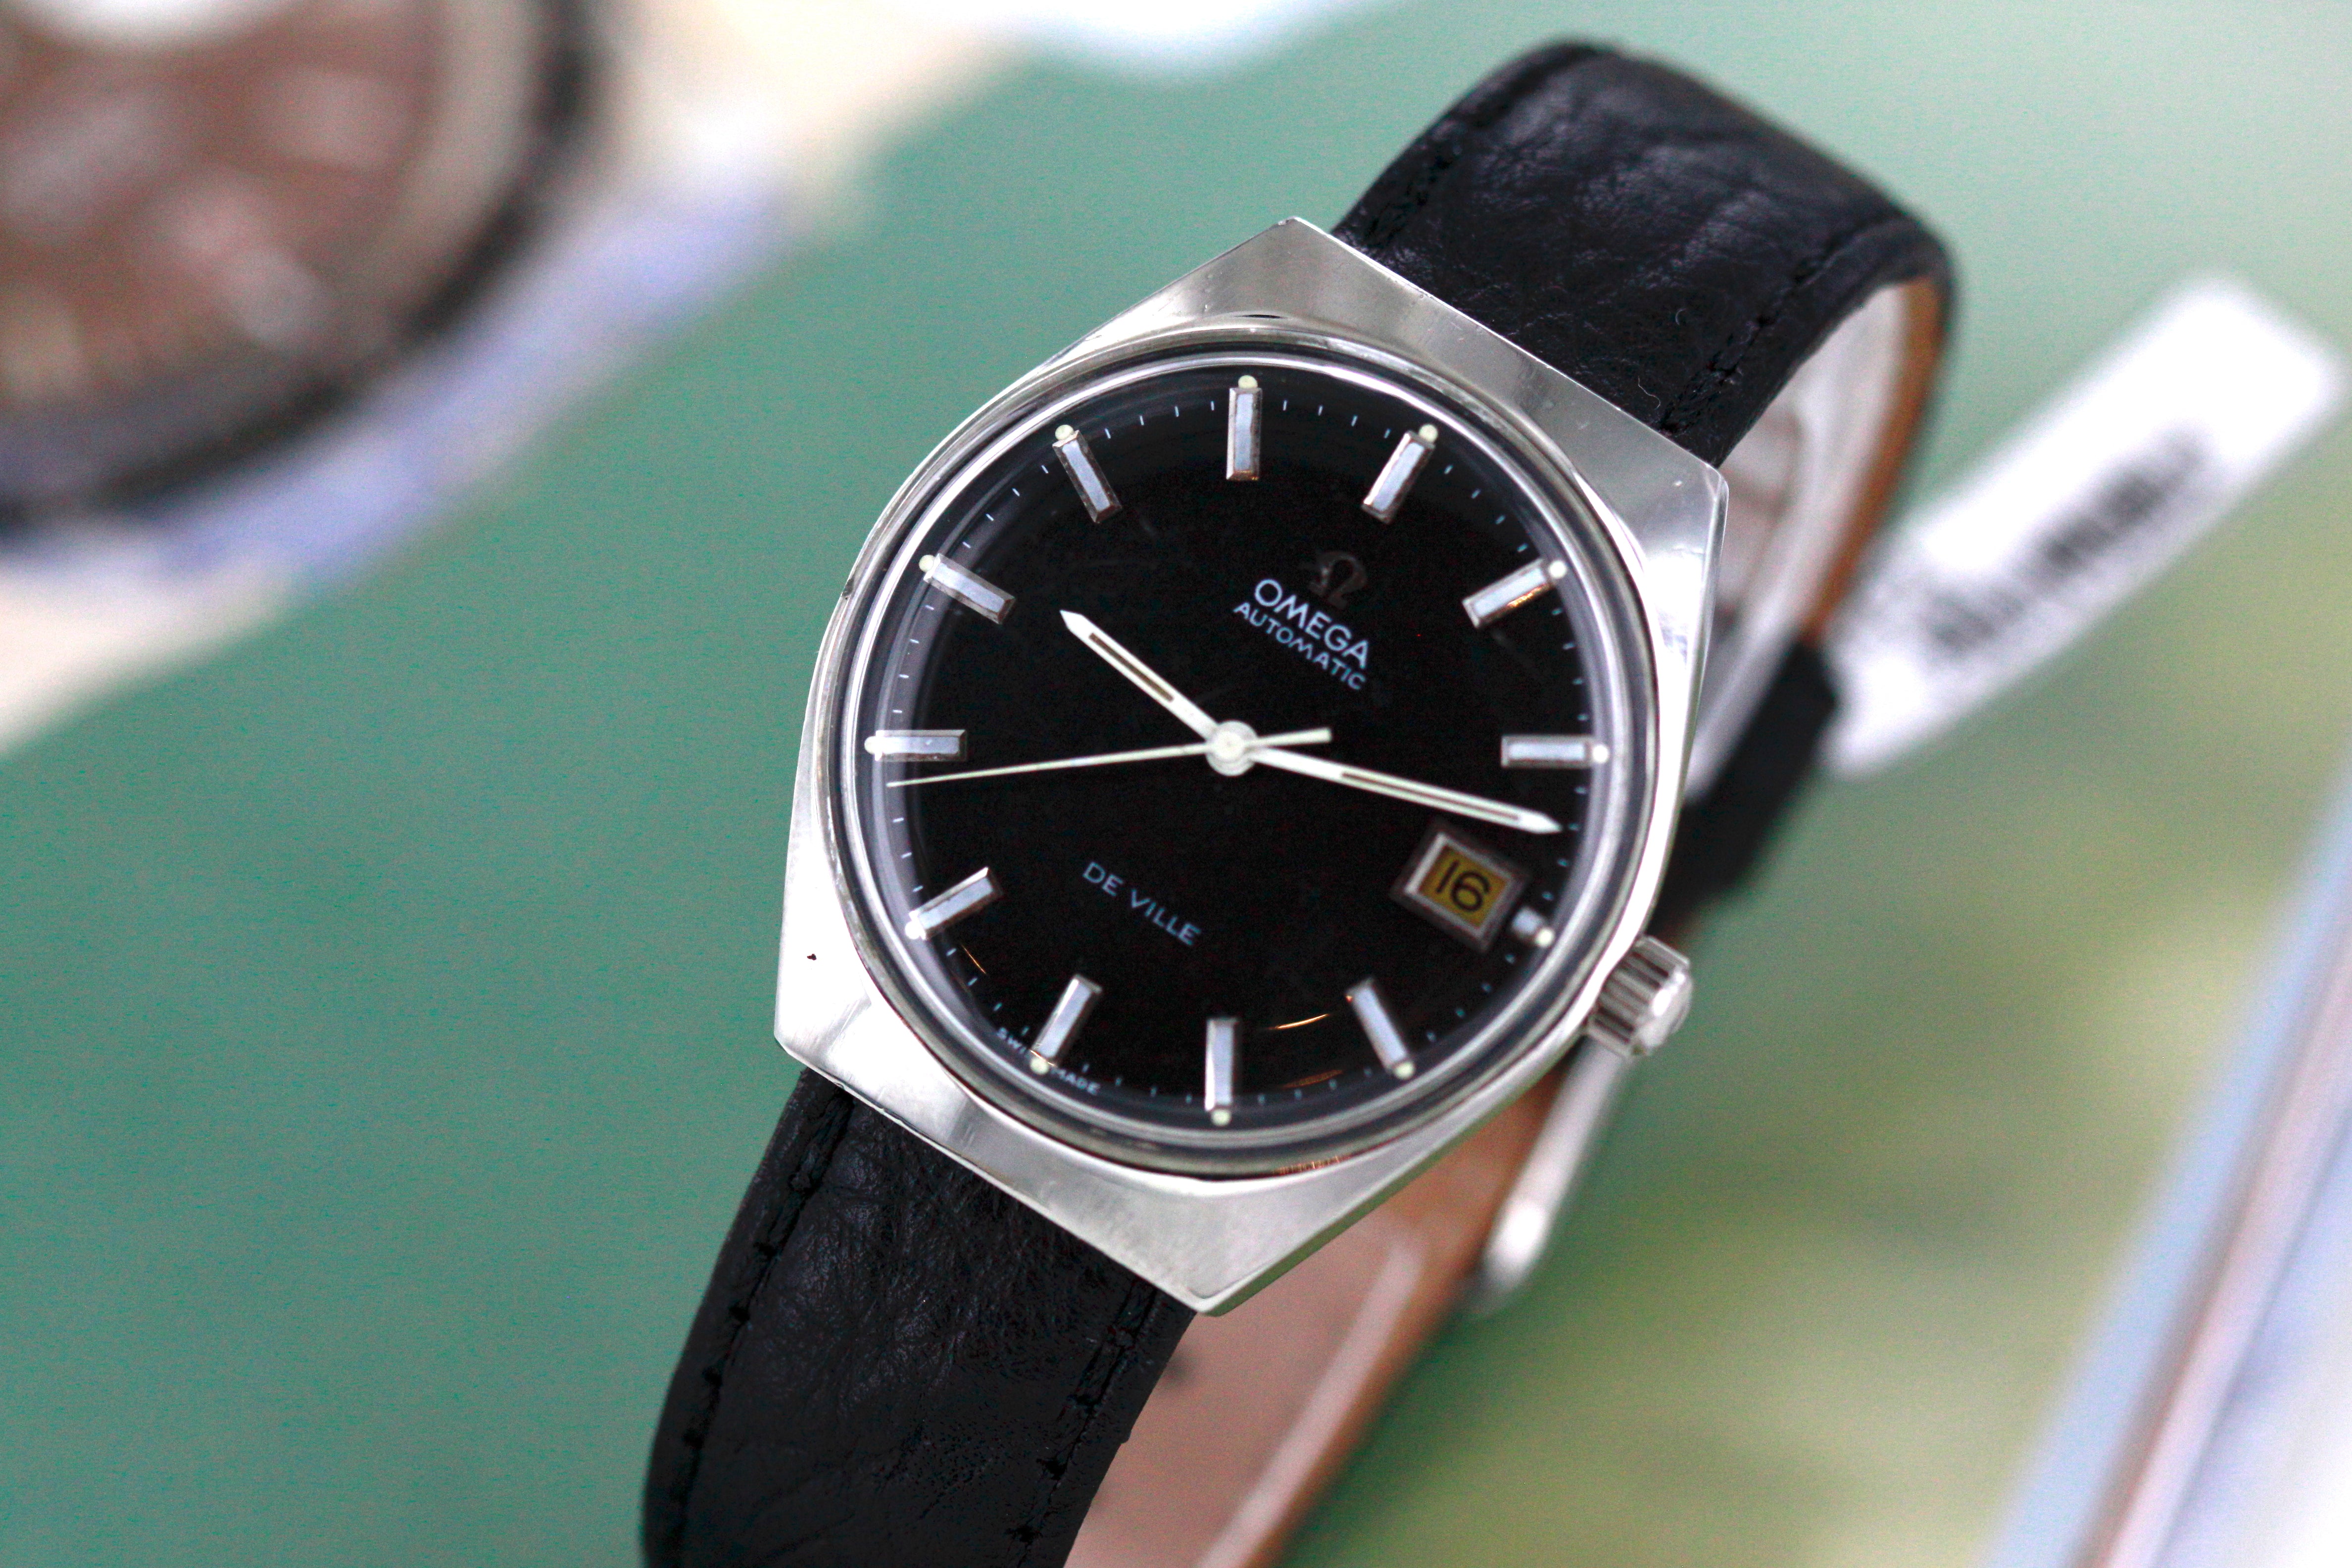 Omega Deville Automatic Black dial - Steel case Year 1980s